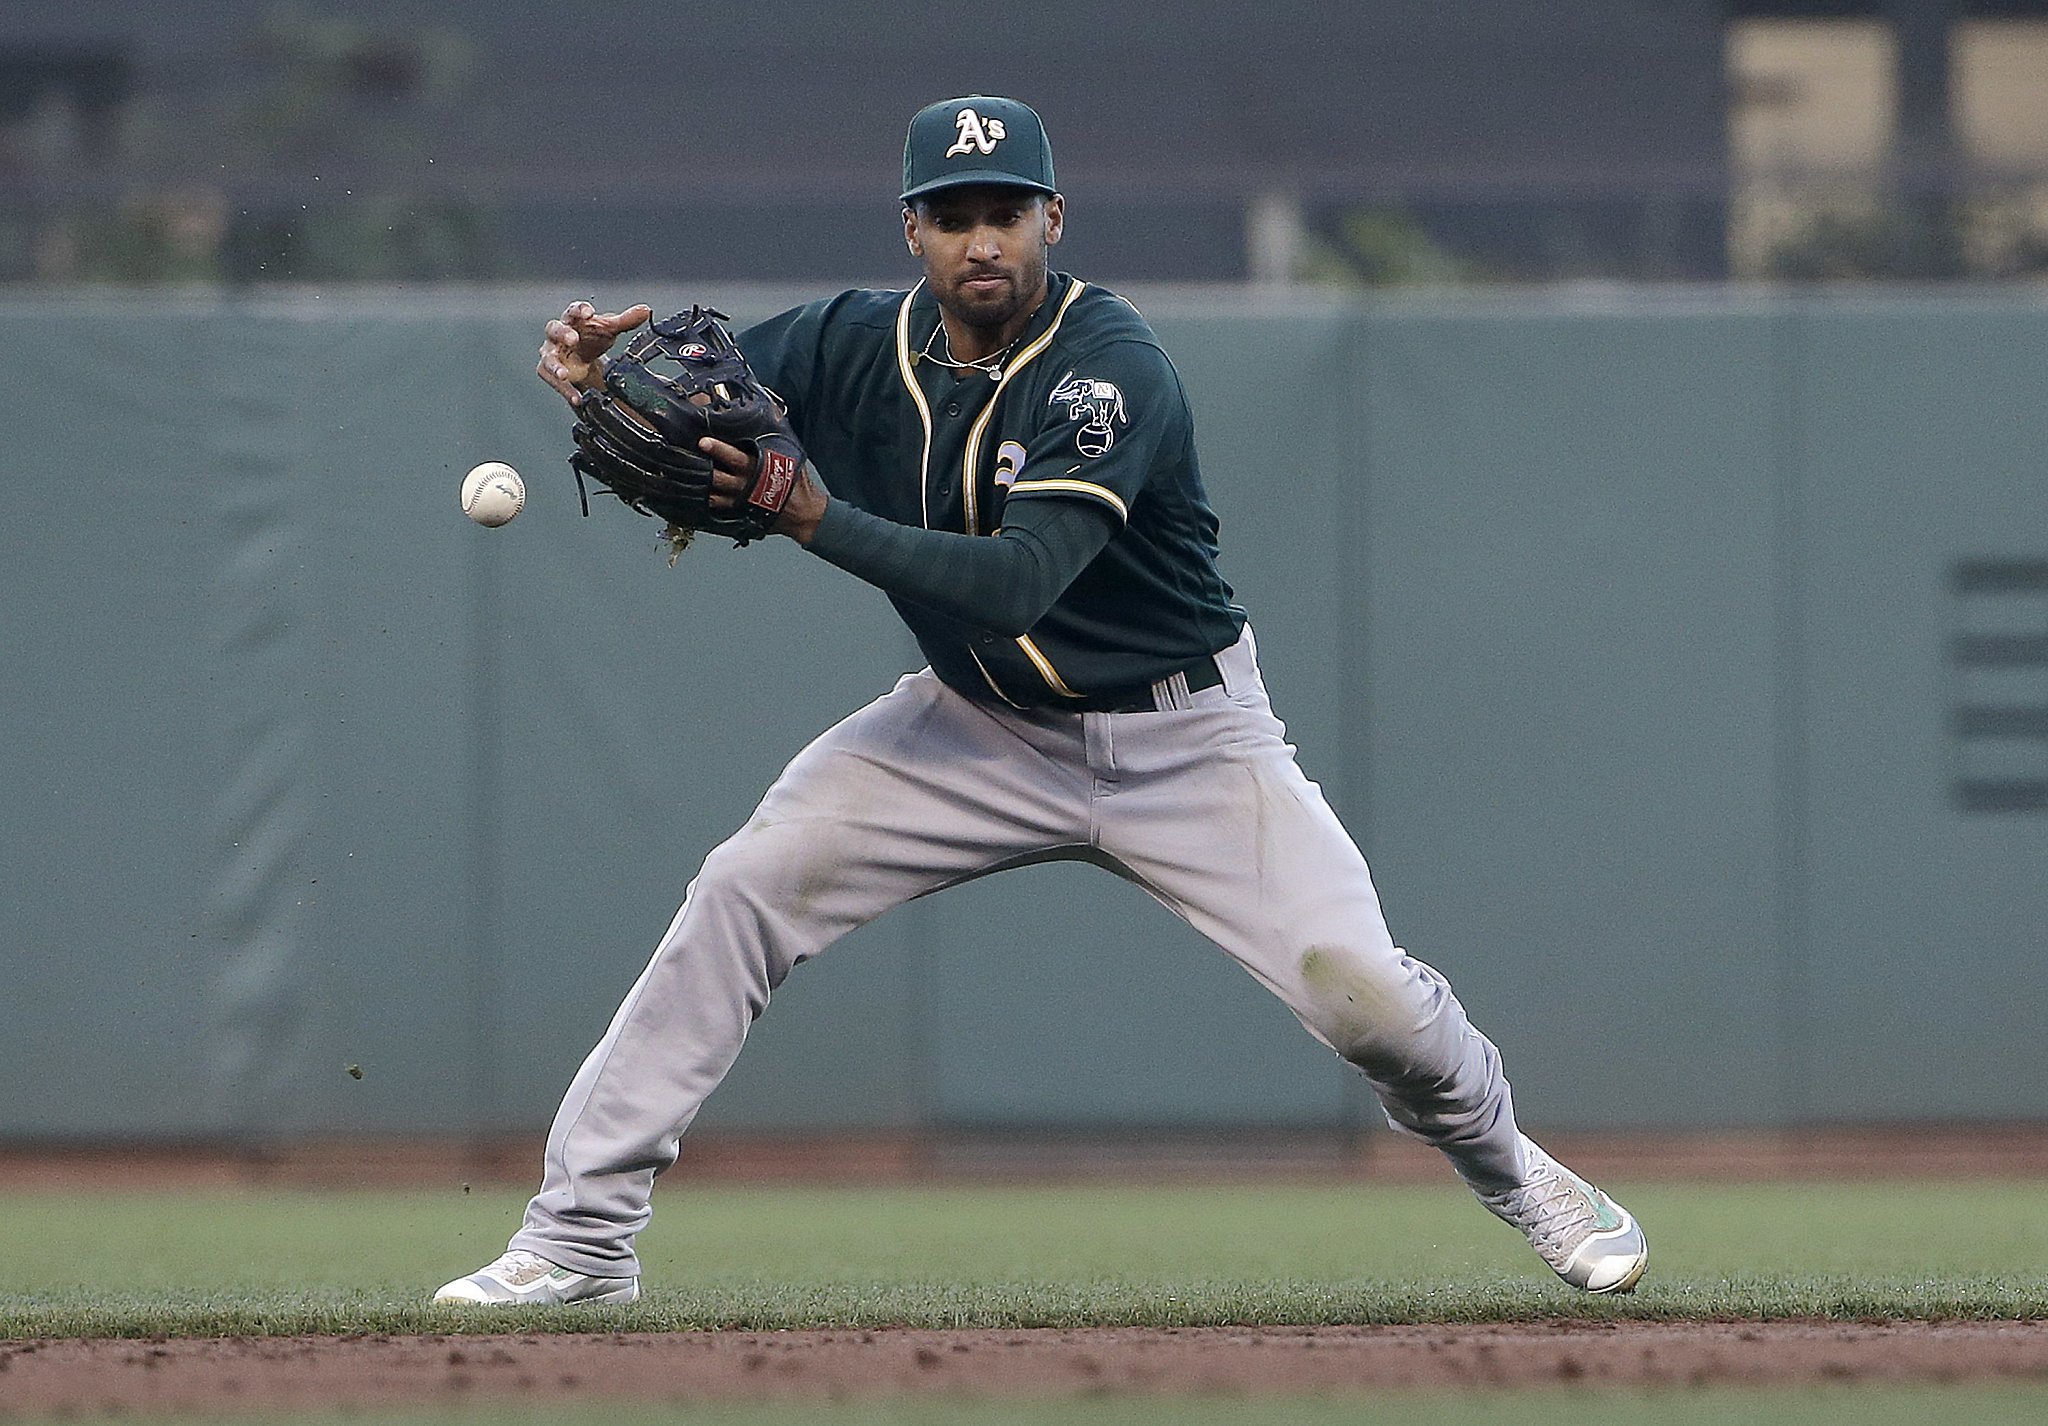 A's Marcus Semien playing every day despite shoulder issue